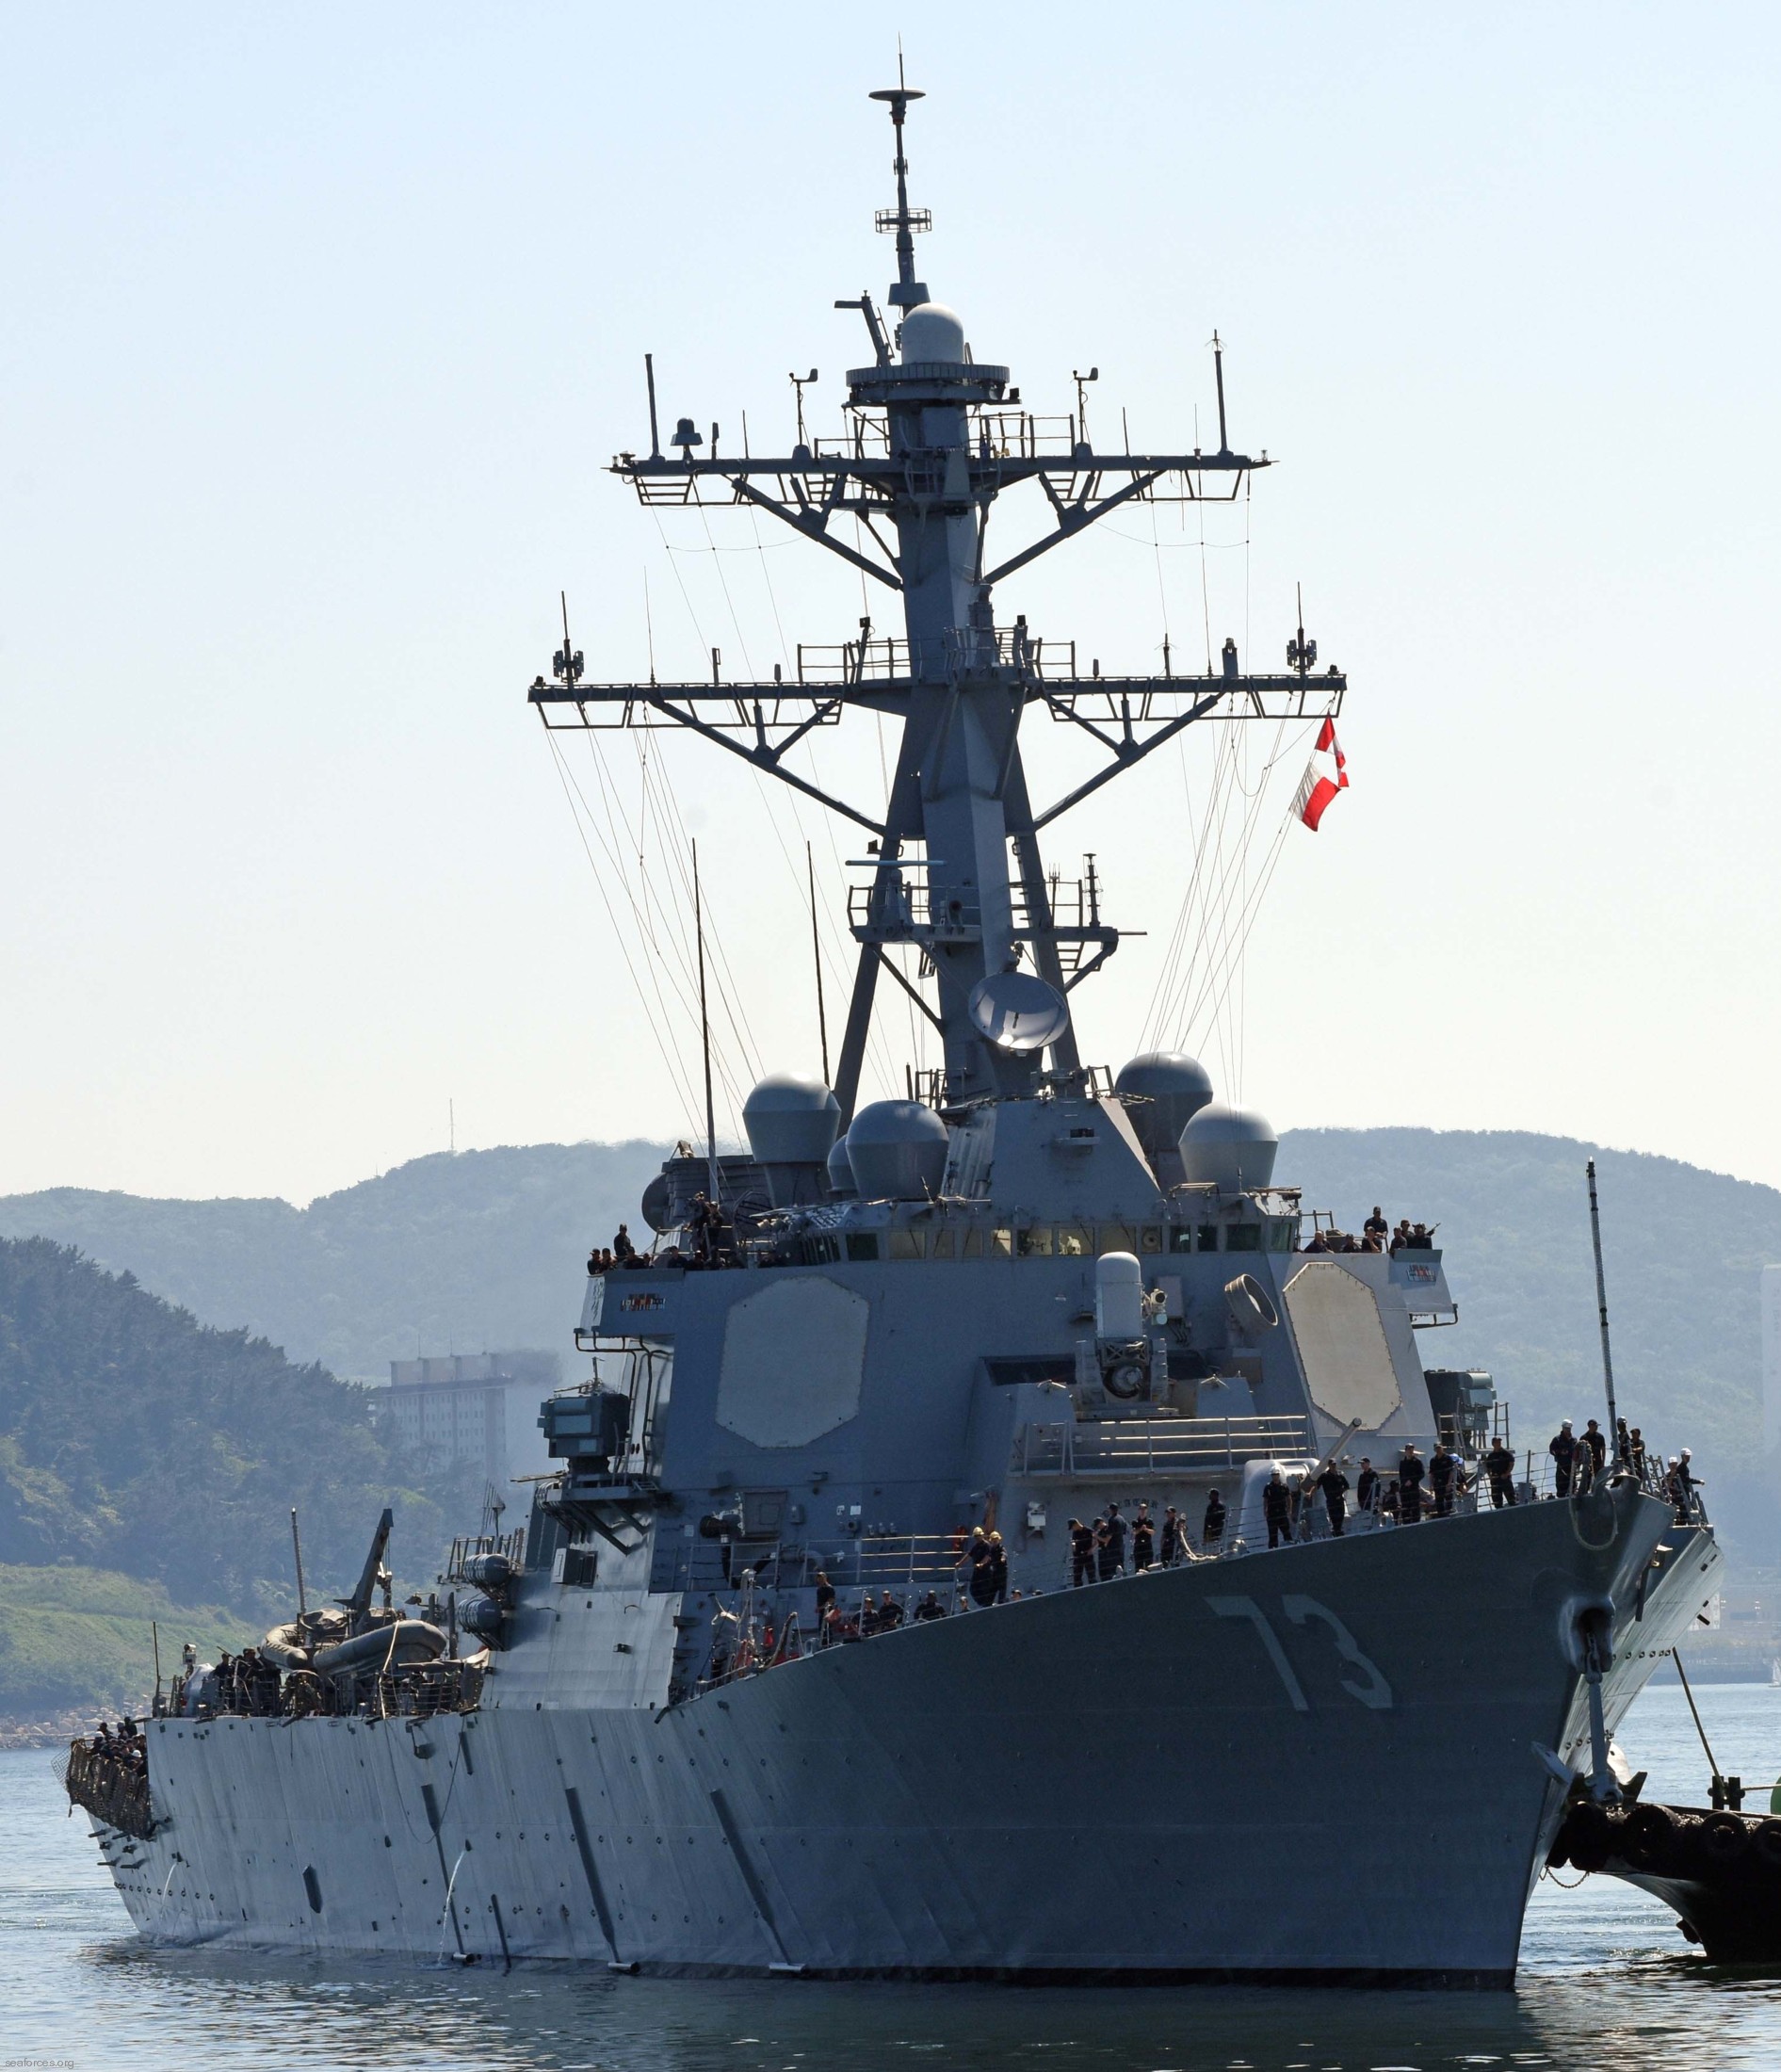 ddg-73 uss decatur guided missile destroyer arleigh burke class aegis bmd 15